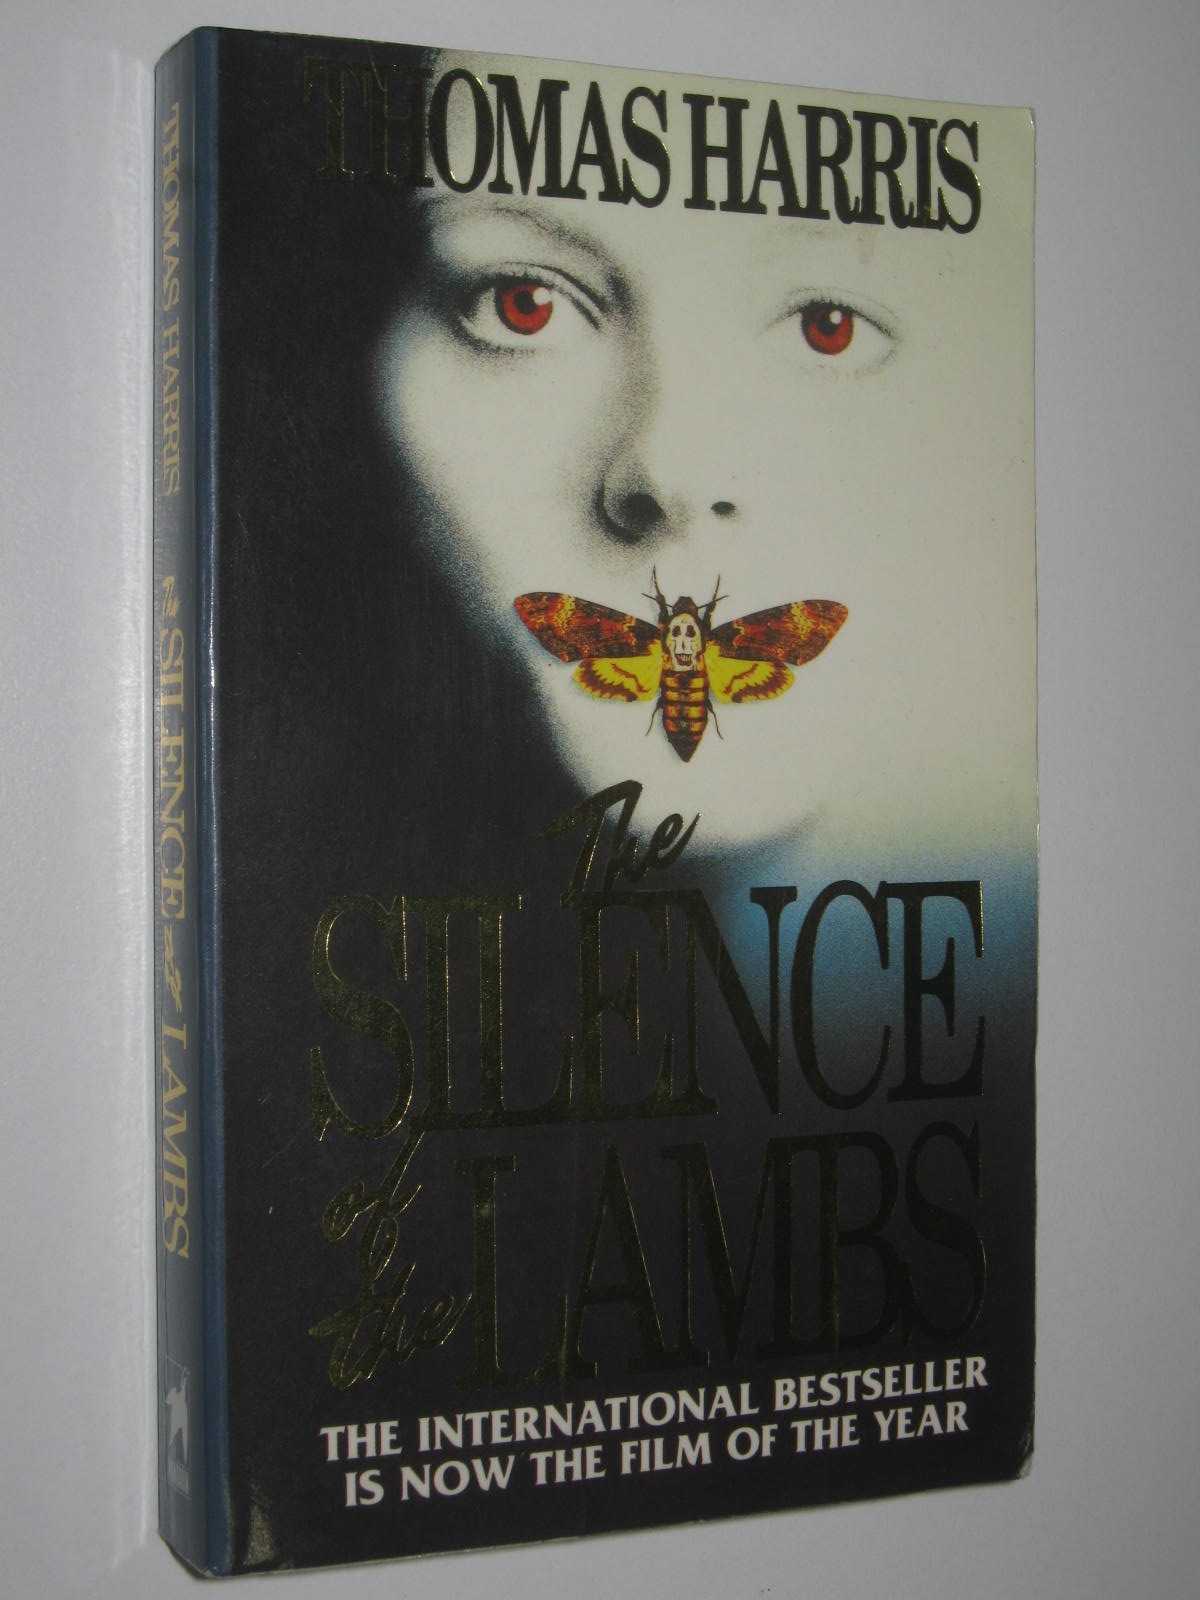 silence of the lambs books in order